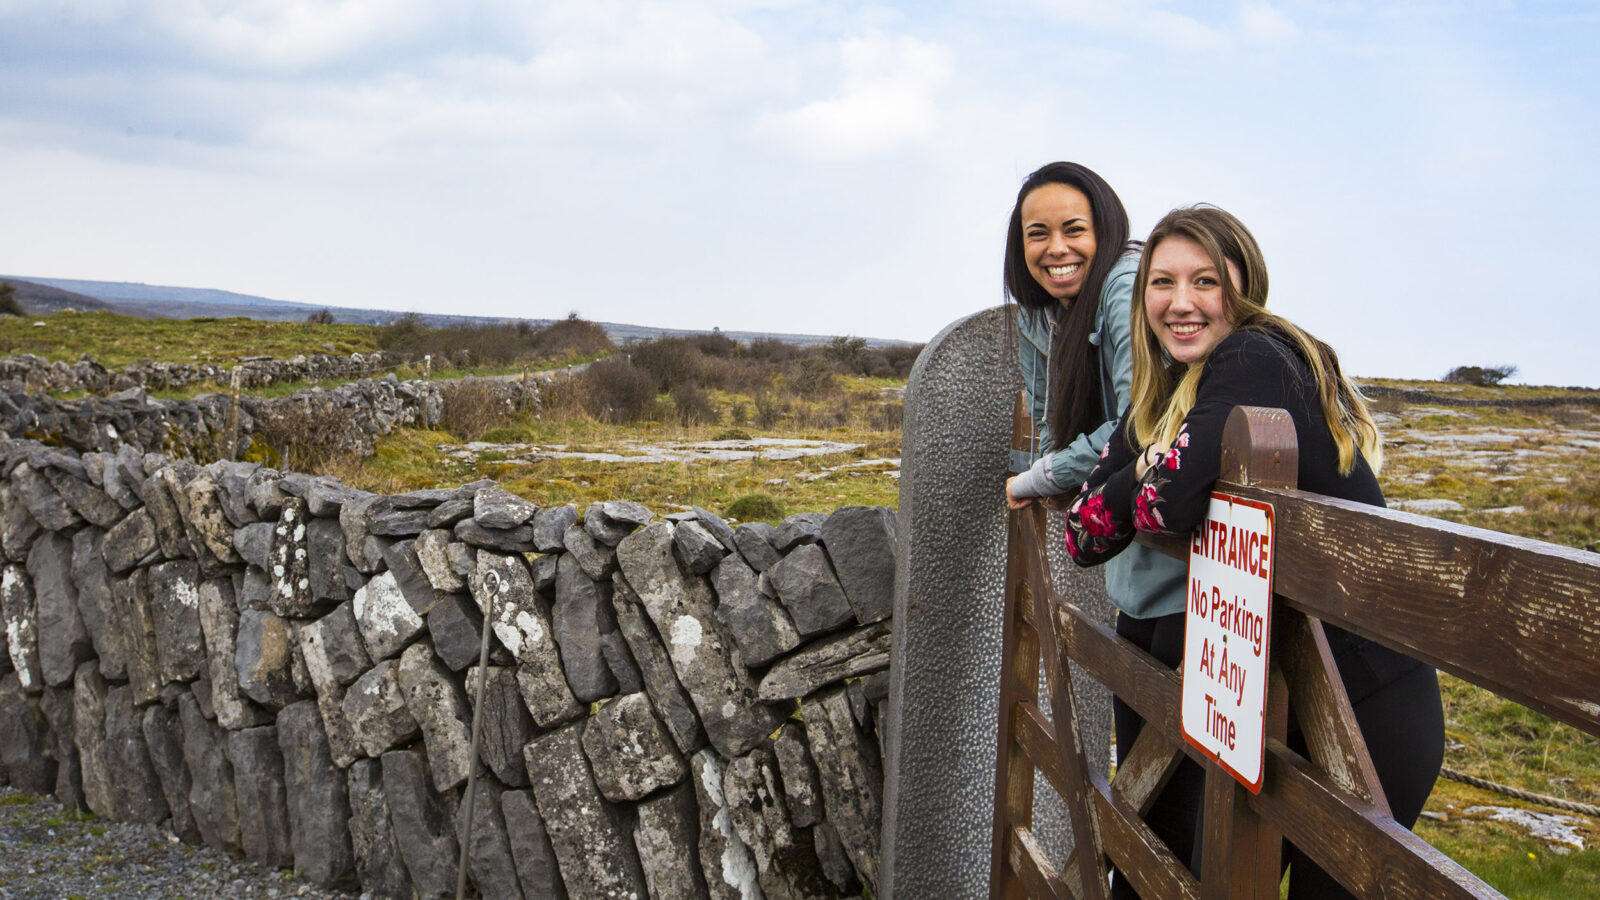 two students stand on a fence, a rock wall encloses a field